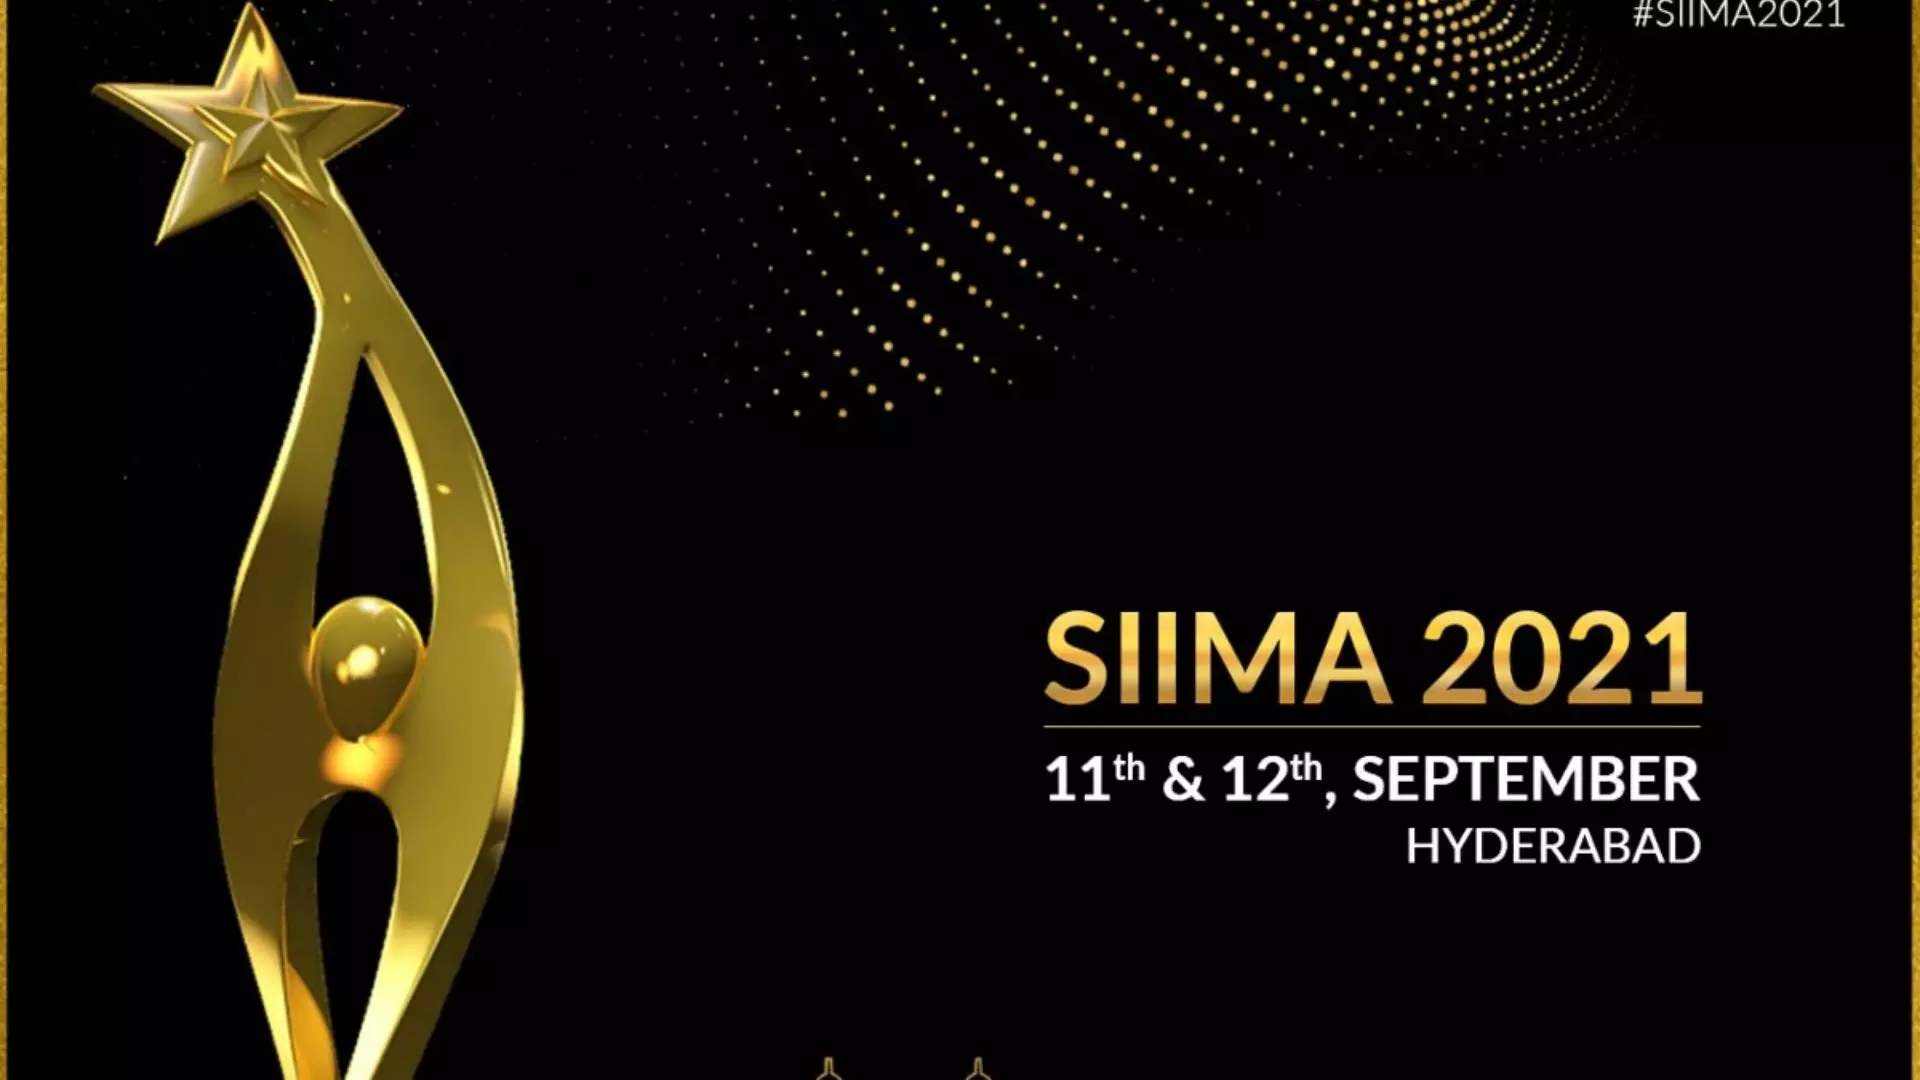 SIIMA Awards 2021 Held in September At Hyderabad Officially Announced by SIIMA